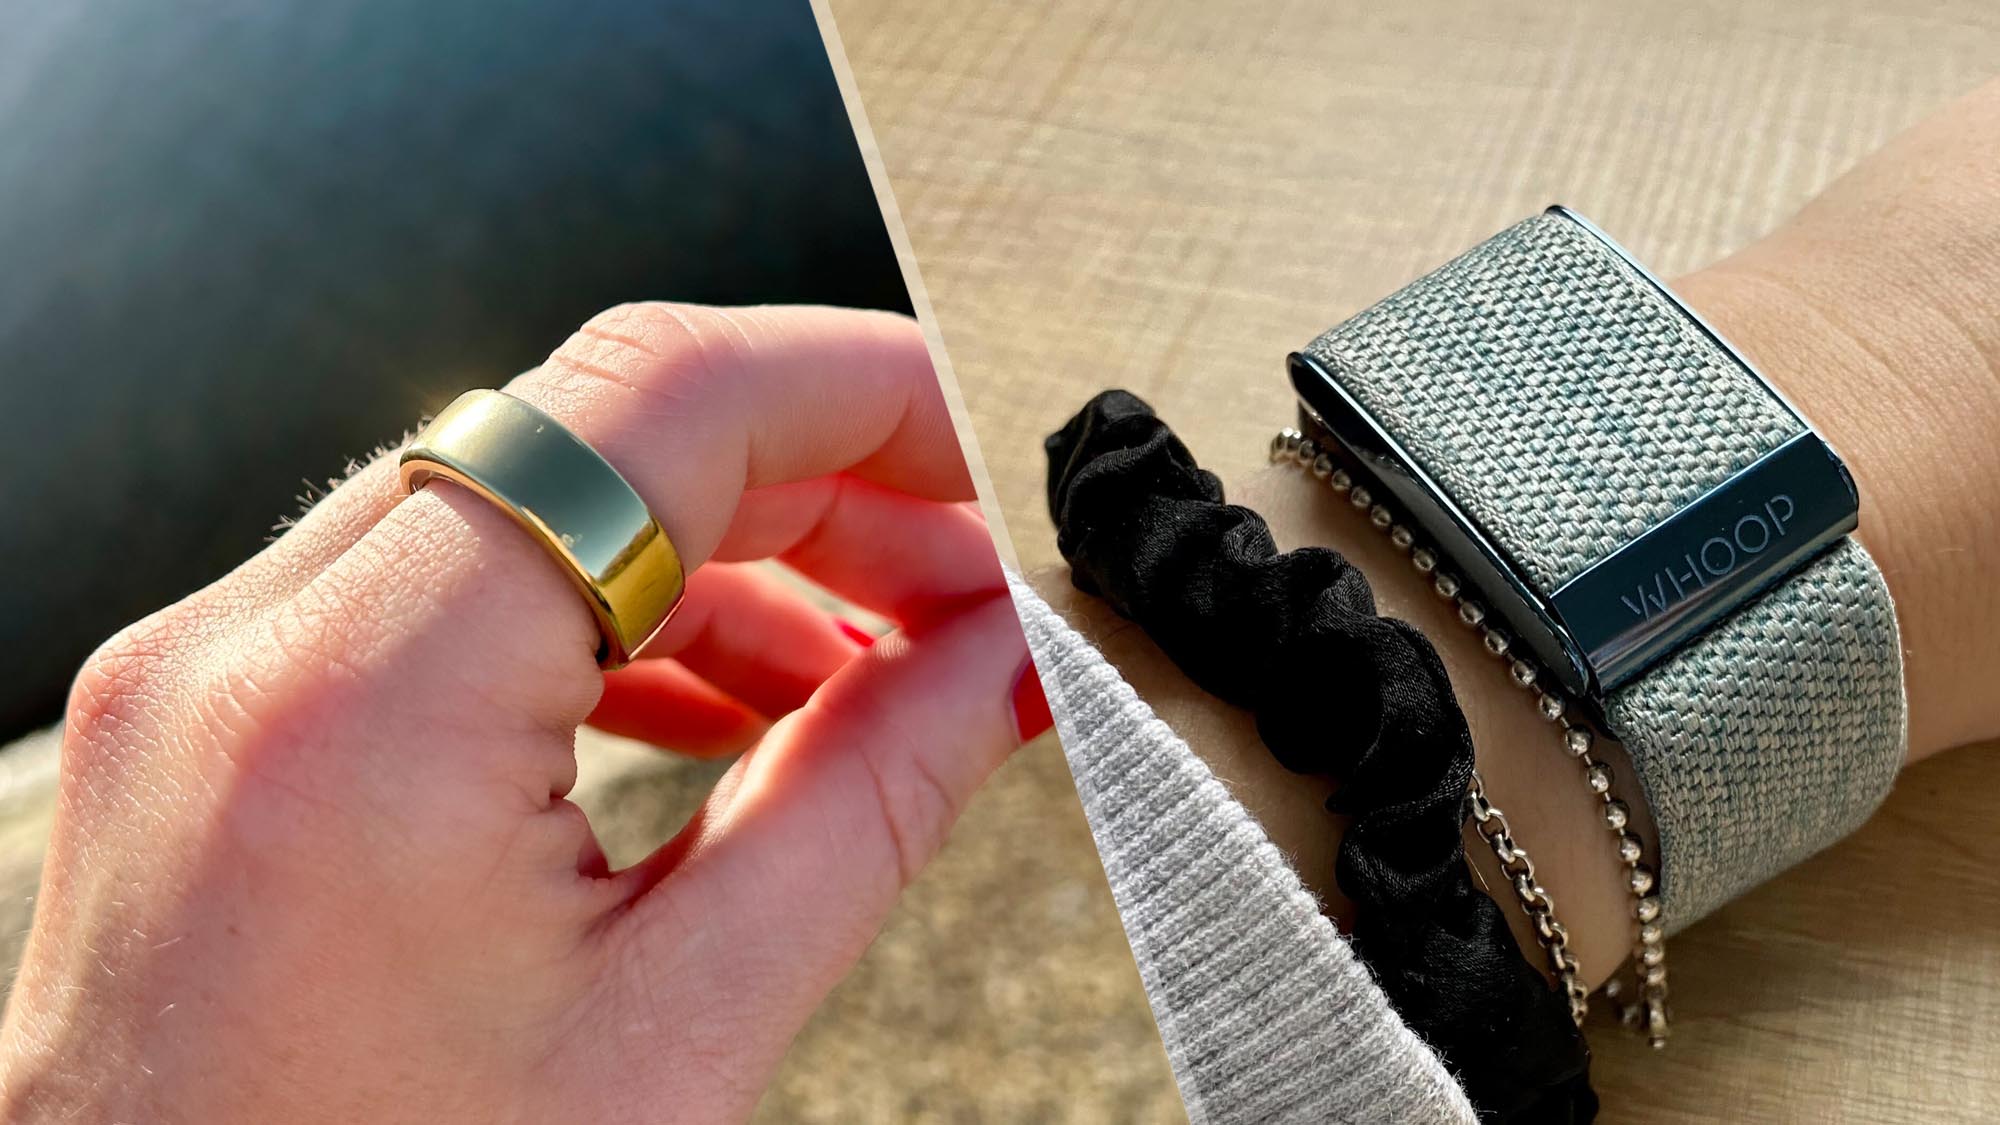 Oura ring 3 vs Whoop 4.0: Which is the best fitness tracker